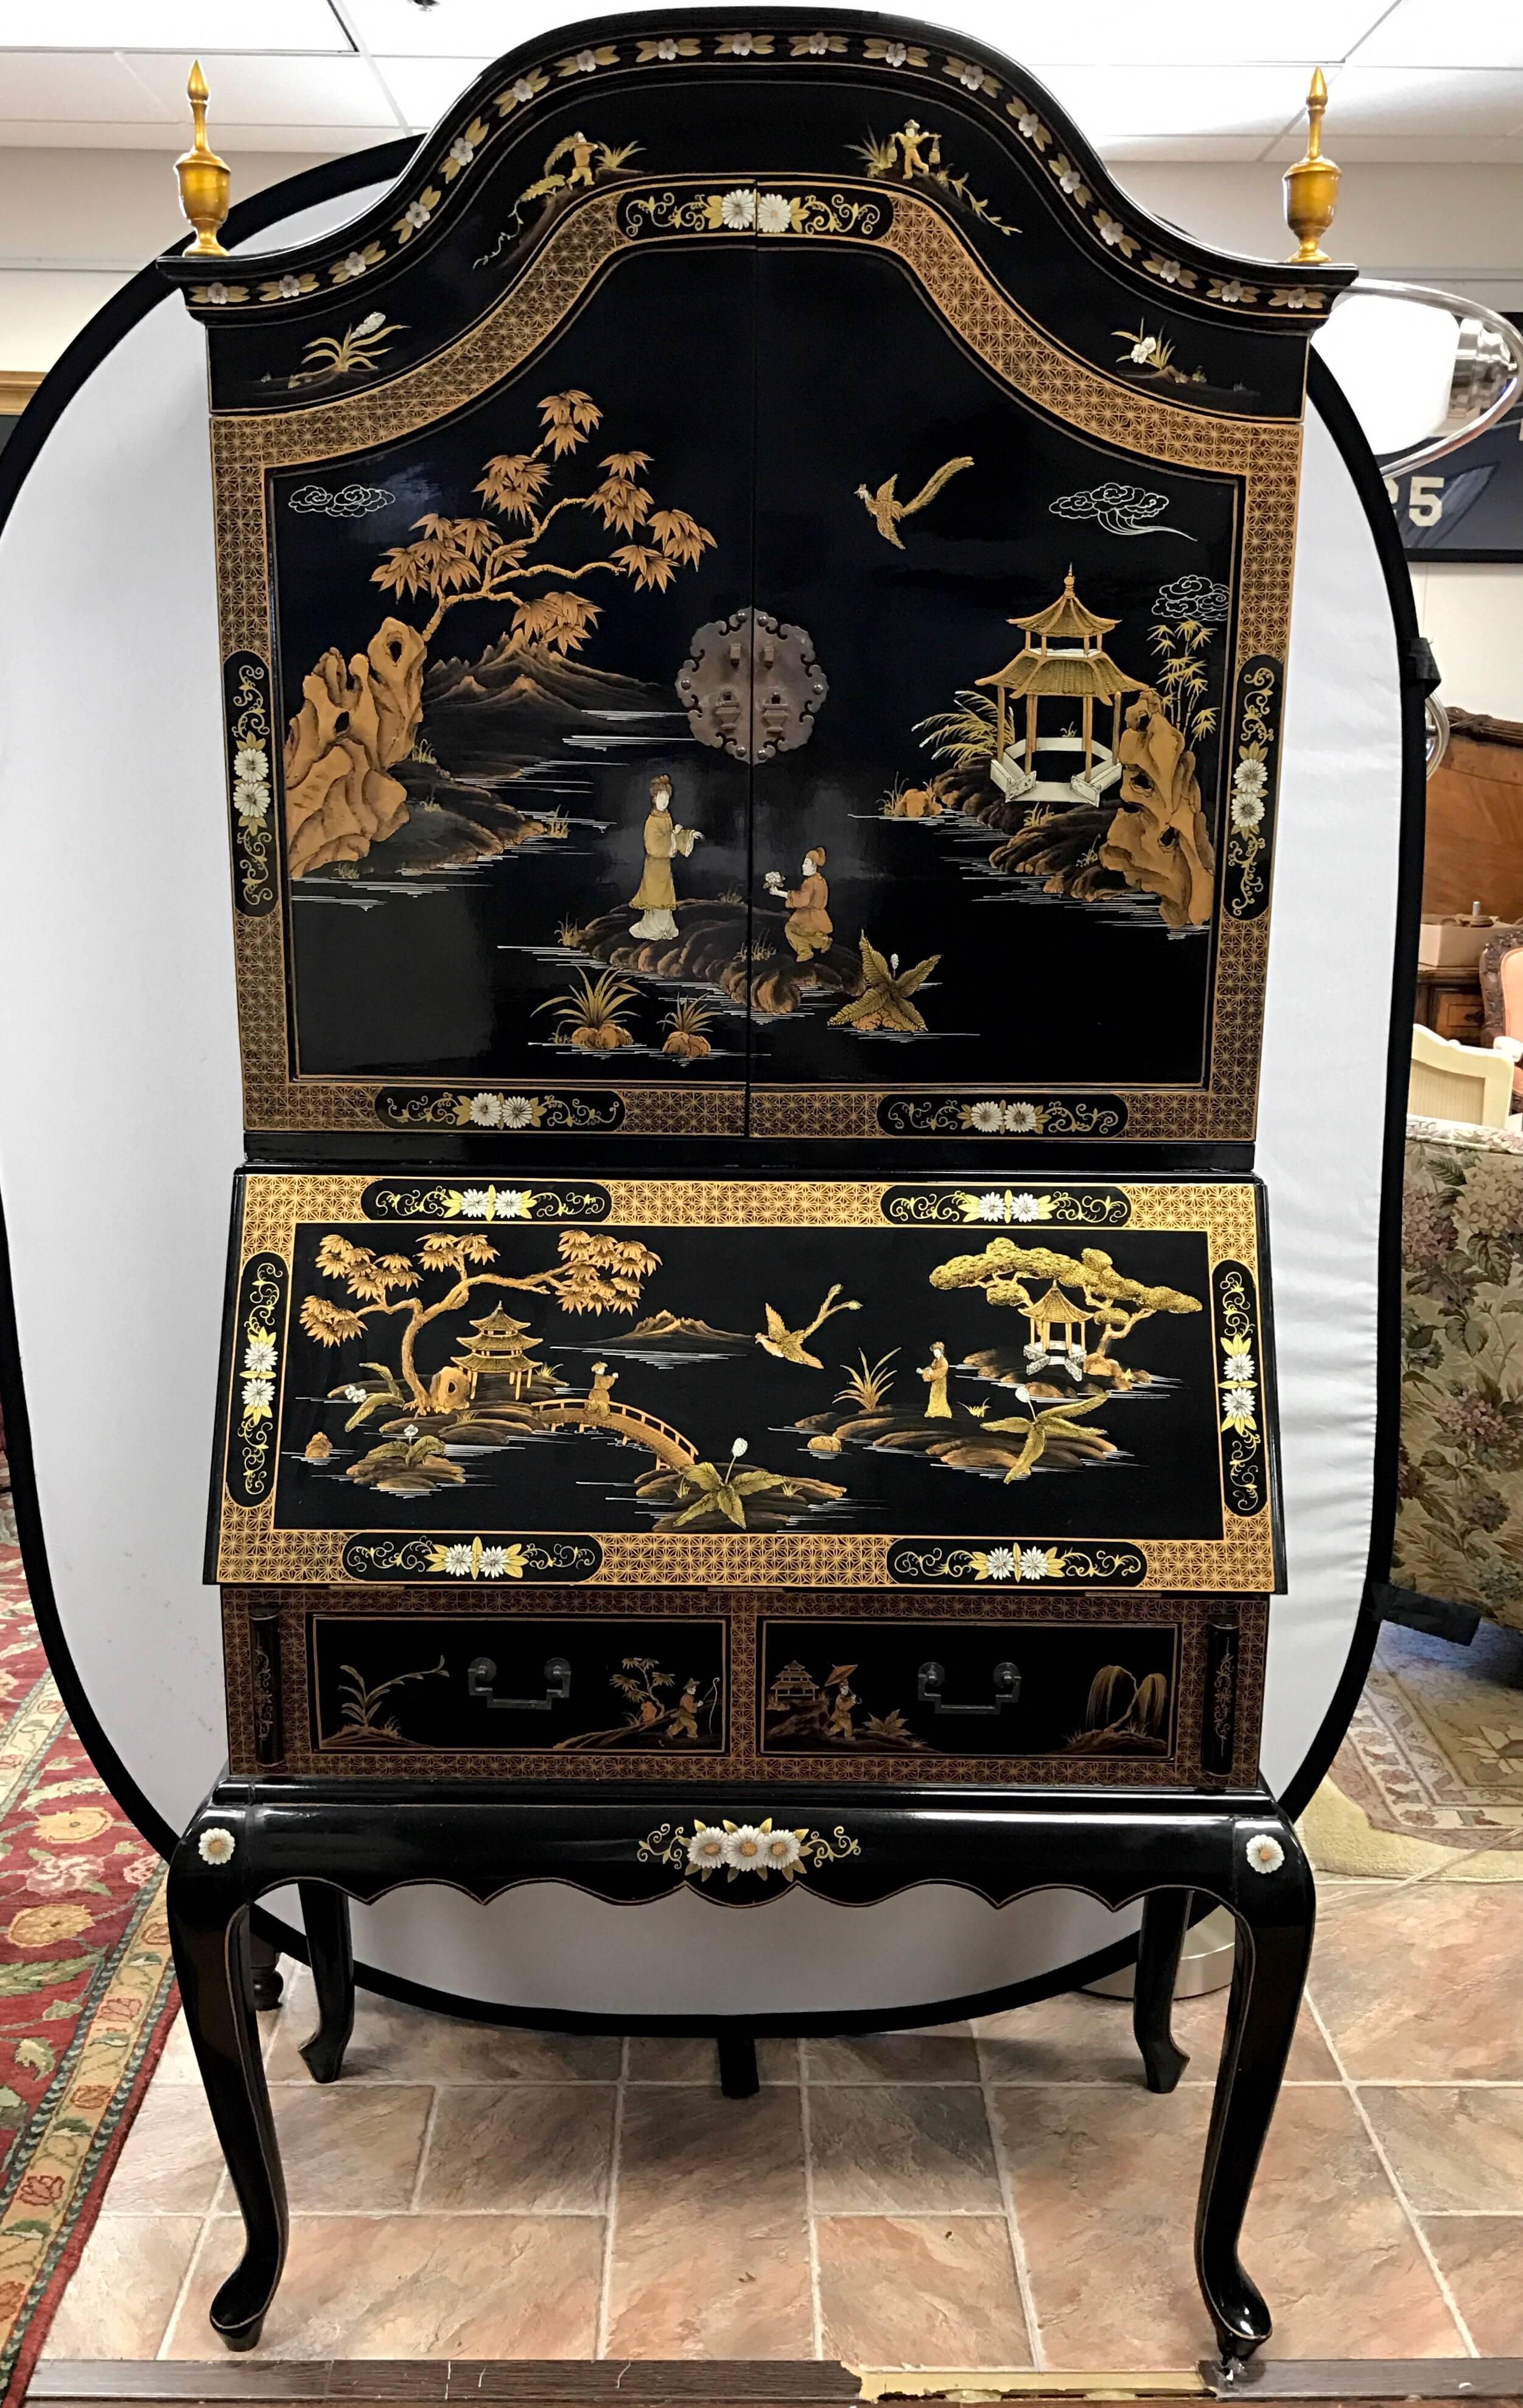 Black and gold chinoiserie vintage Asian secretary desk that comes with matching chair. Spectacular painted scenery of Chinese landscape including birds and flowers. Comes with separate top and bottom. Top doors open to shelves. Bottom opens to drop